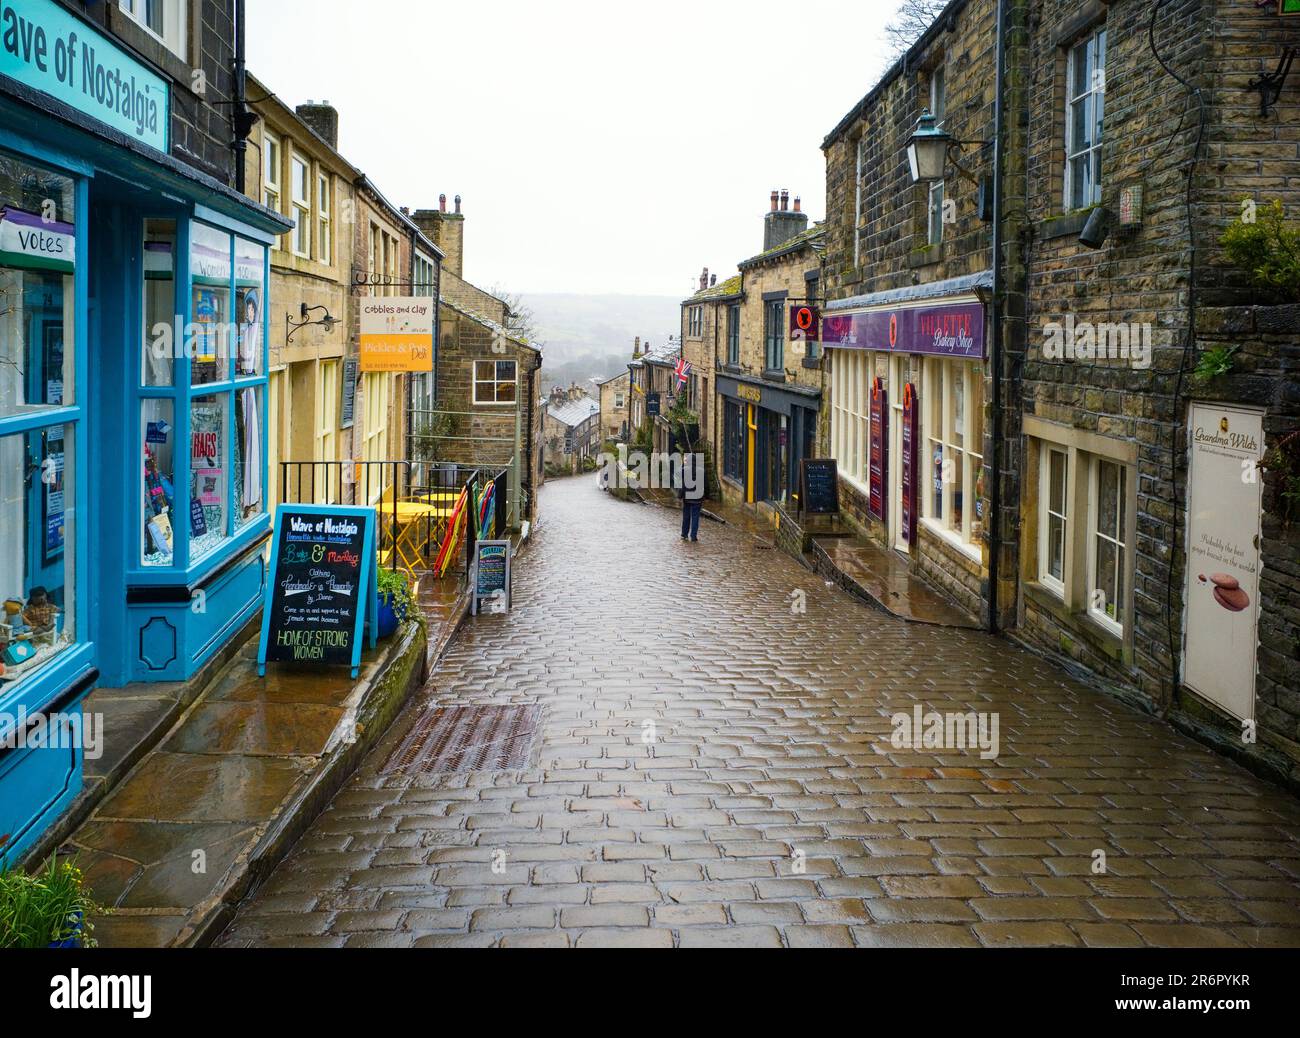 The main street in Howarth on a wet and rainy day Stock Photo